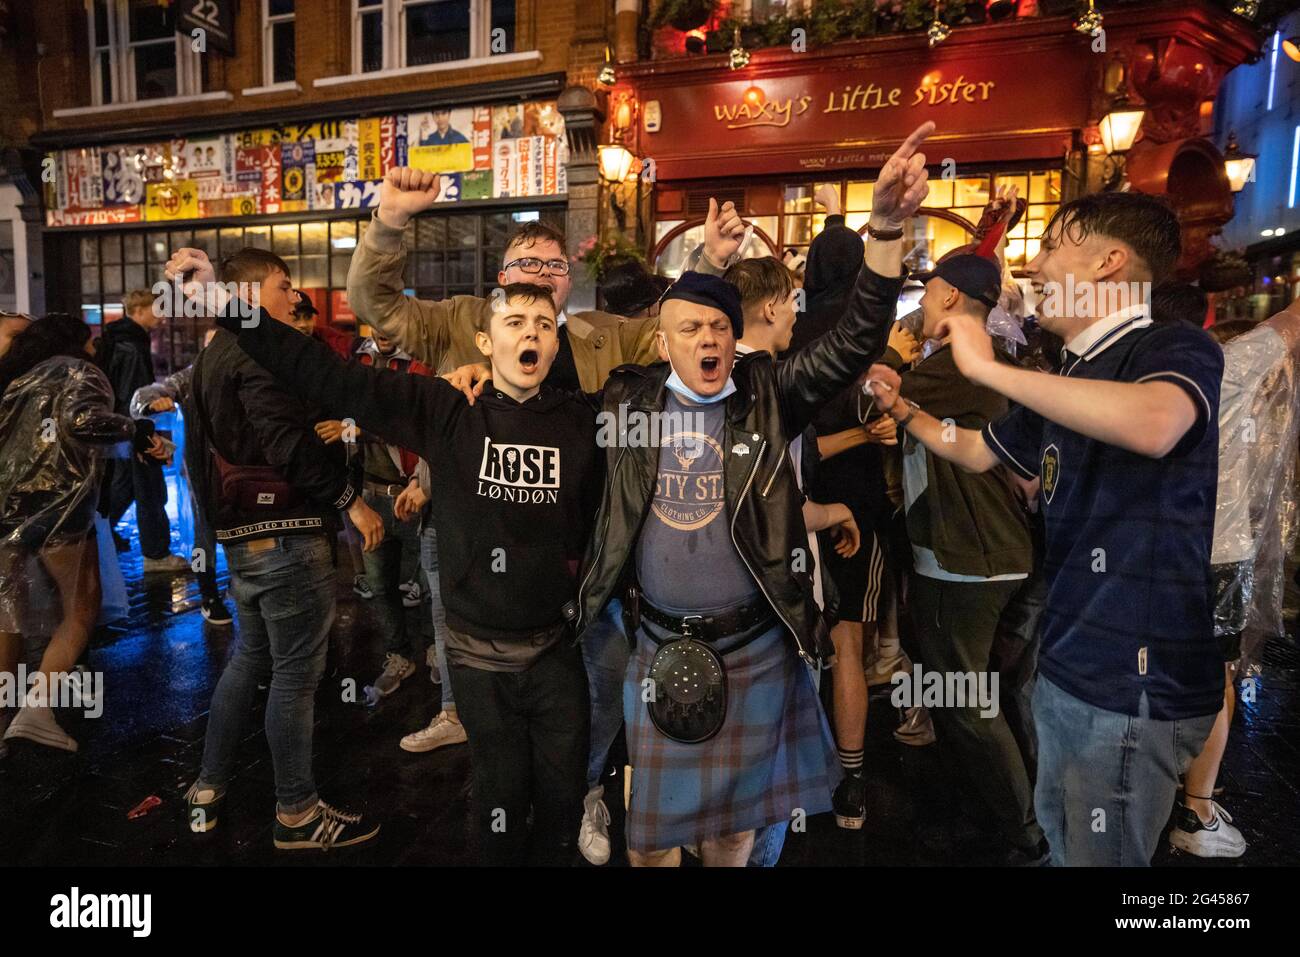 London, UK. 18th June, 2021. Scottish fans celebrate in Leicester Square area after drawing 0-0 with England in the Euro21 Match on Friday night. Credit: Jeff Gilbert/Alamy Live News Stock Photo